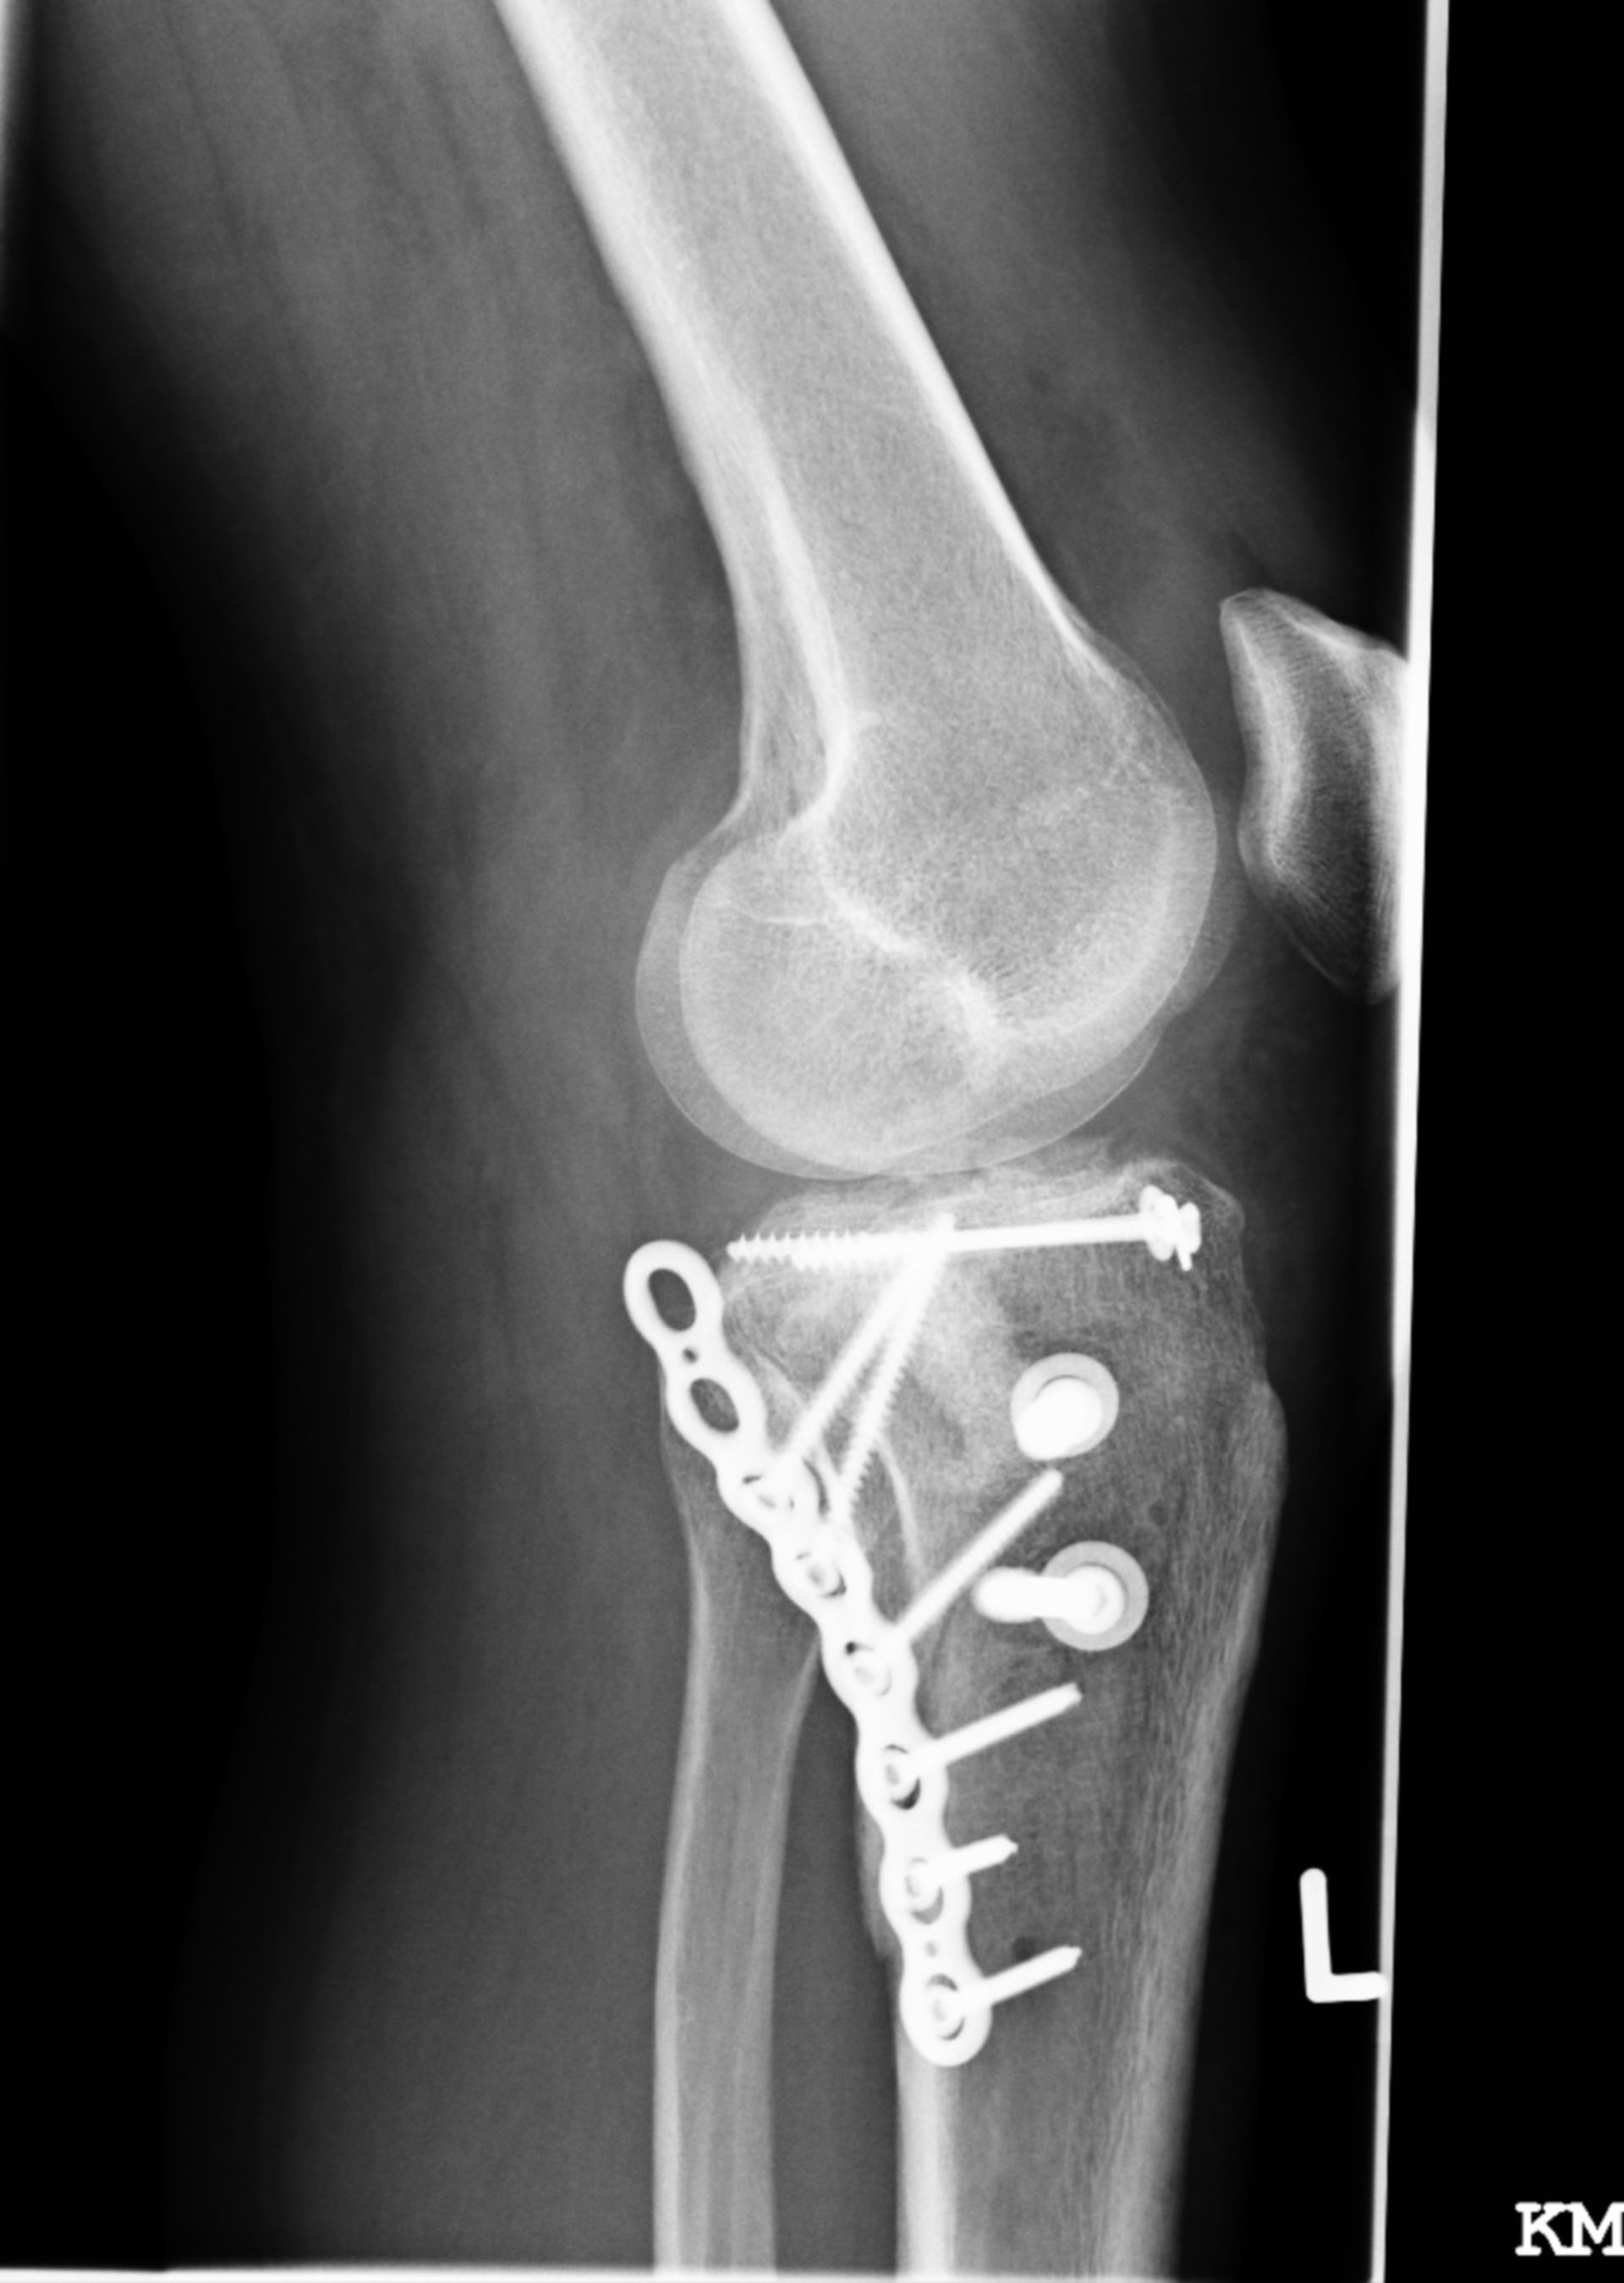 Tibia head fracture- osteosynthesis